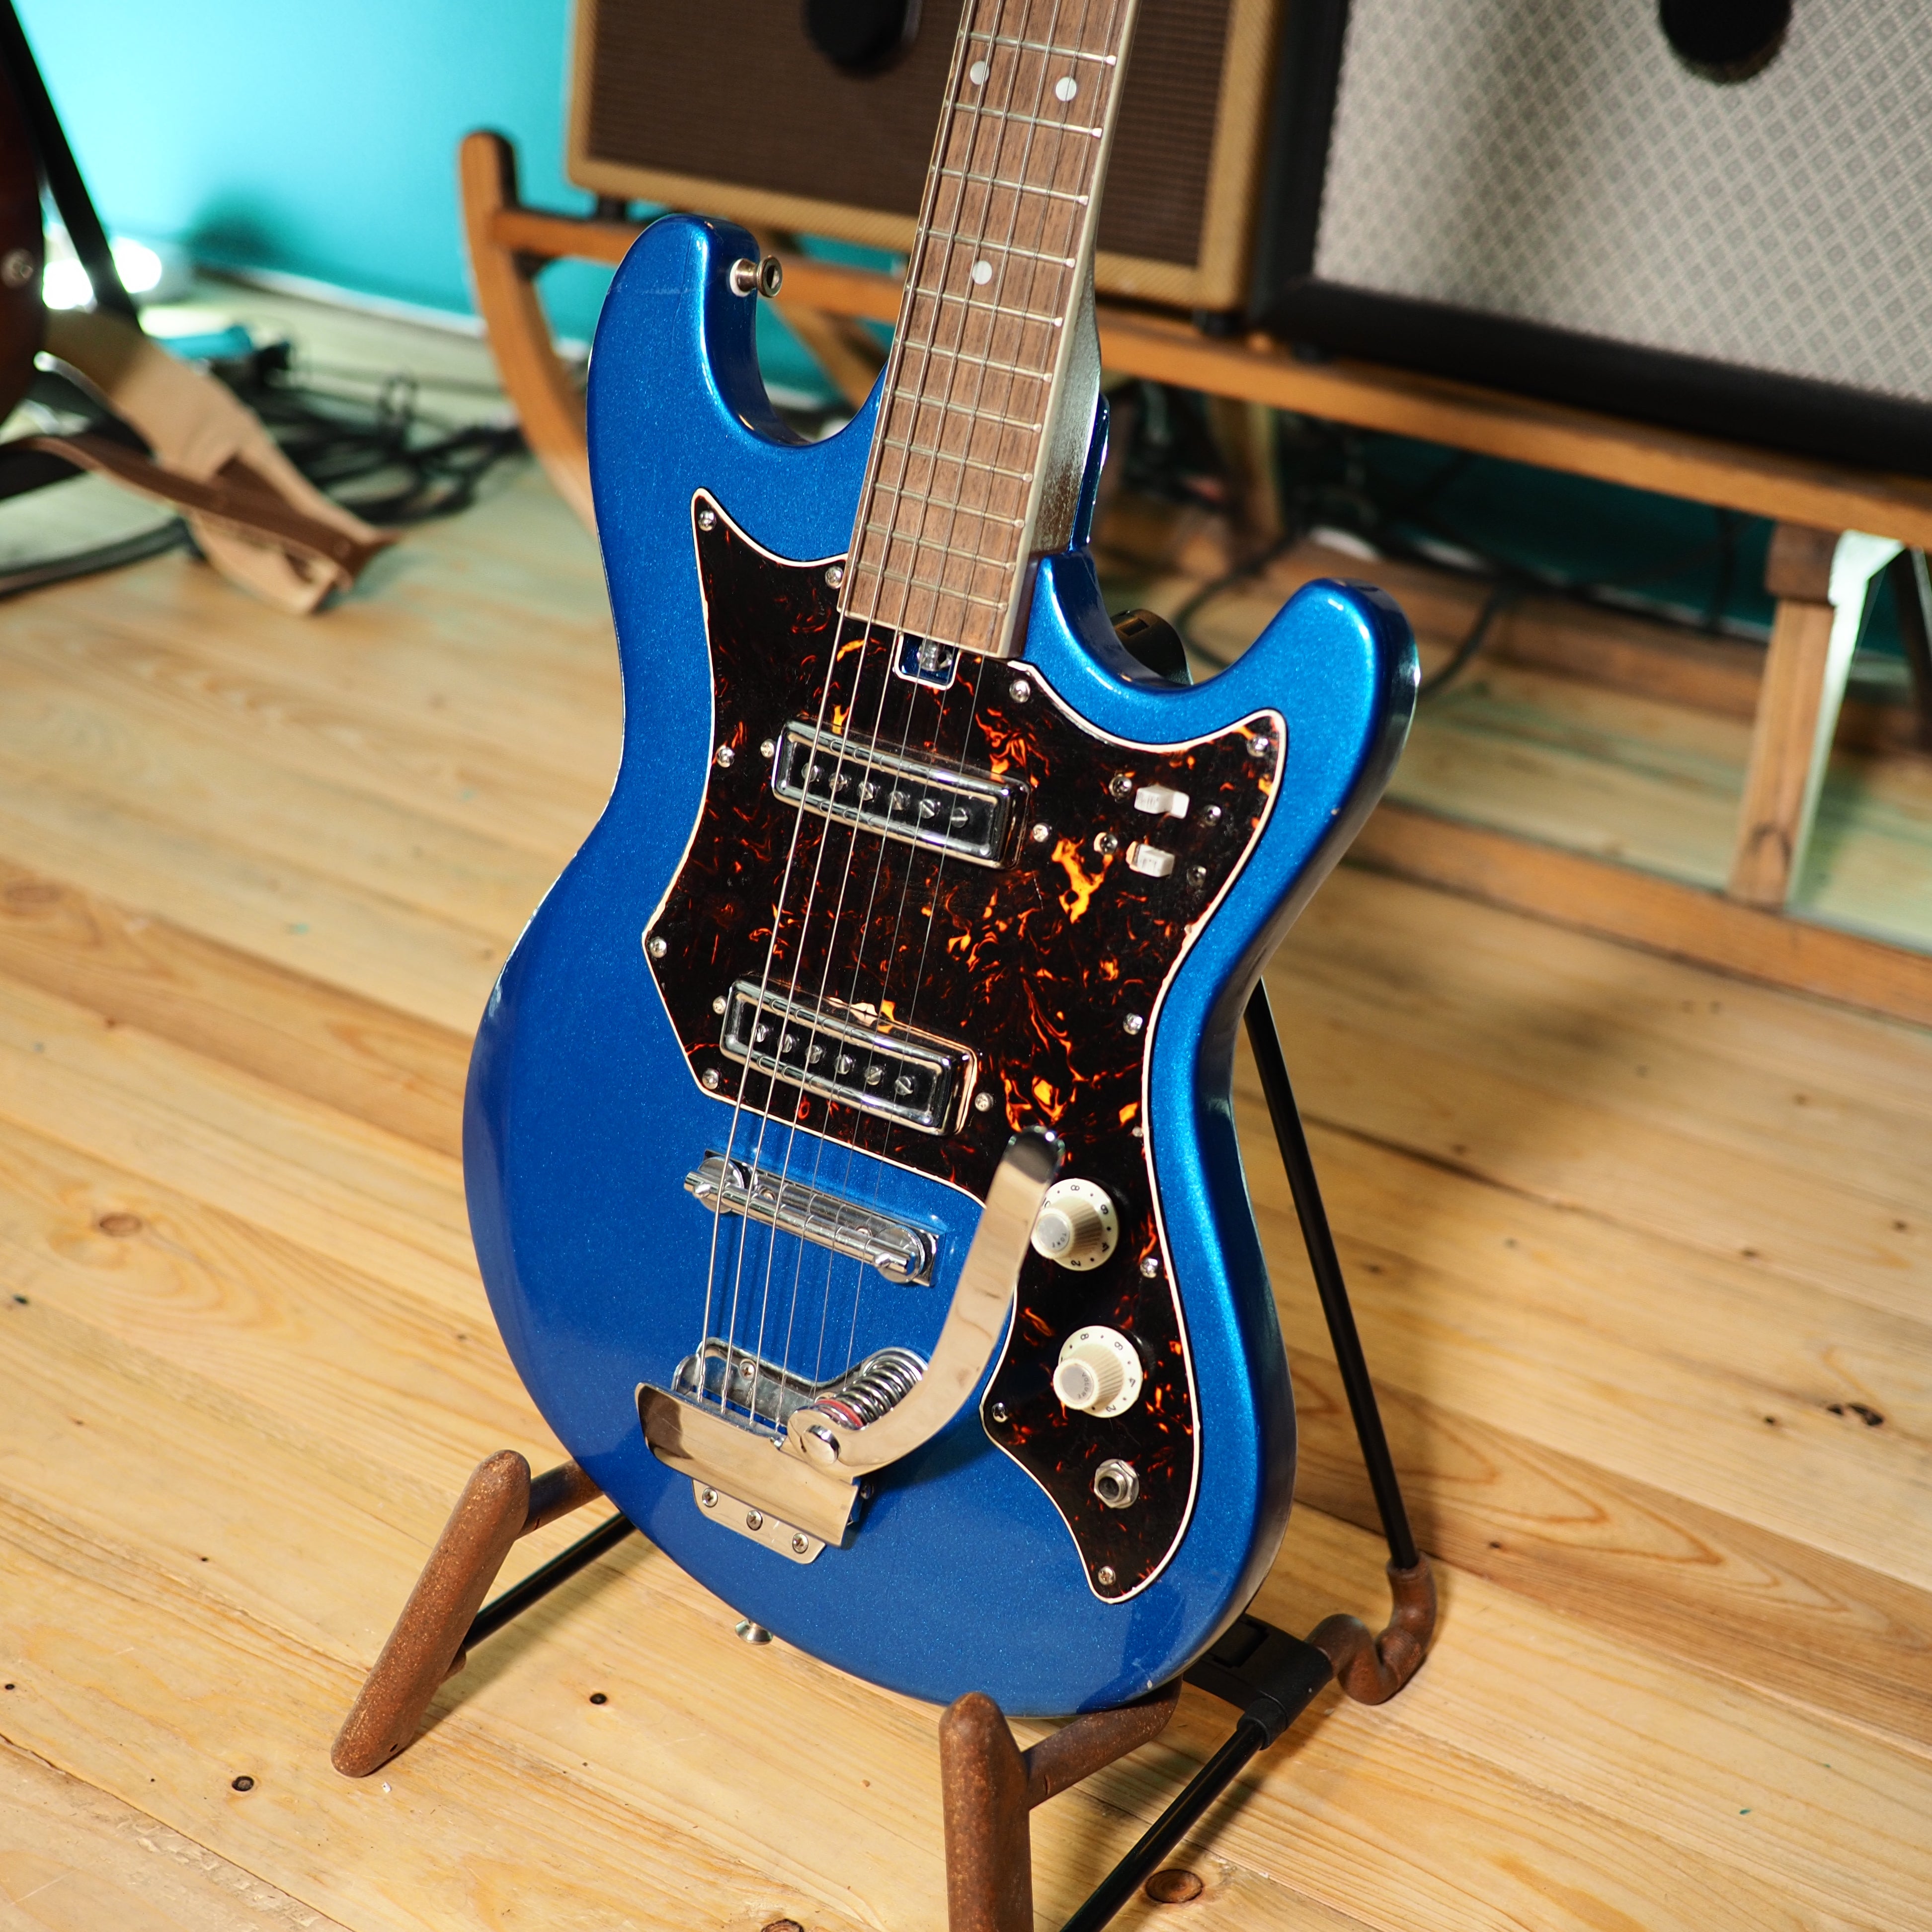 Teisco from the 60s in metallic blue